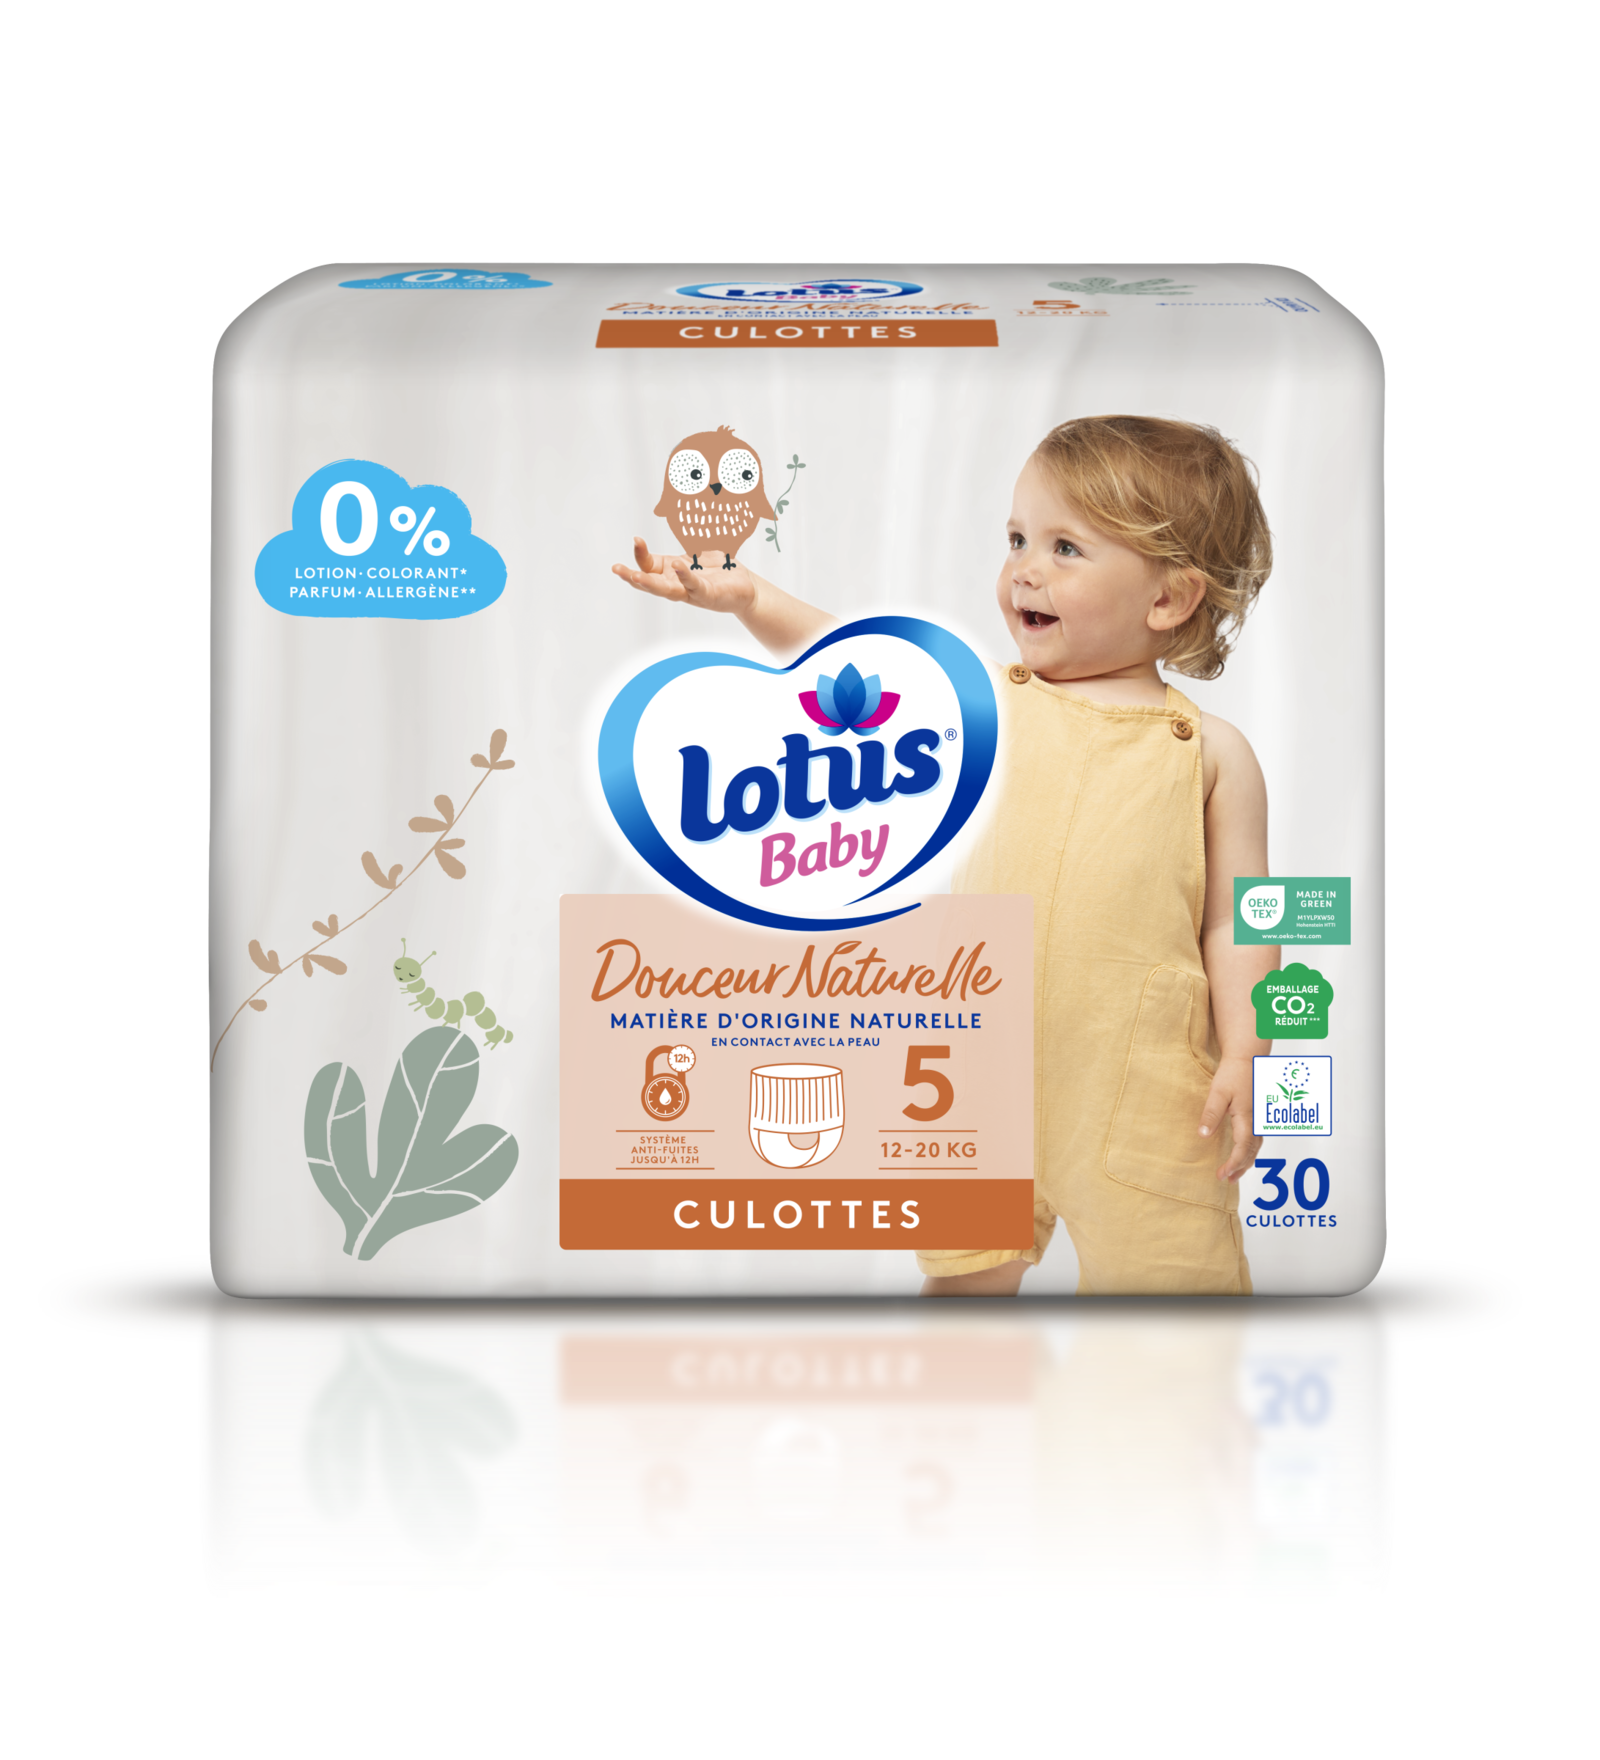 Lotus Baby Natural Touch Culottes Taille 5 (13-20Kg) x36 (lot de 2 soit 72  couches) 